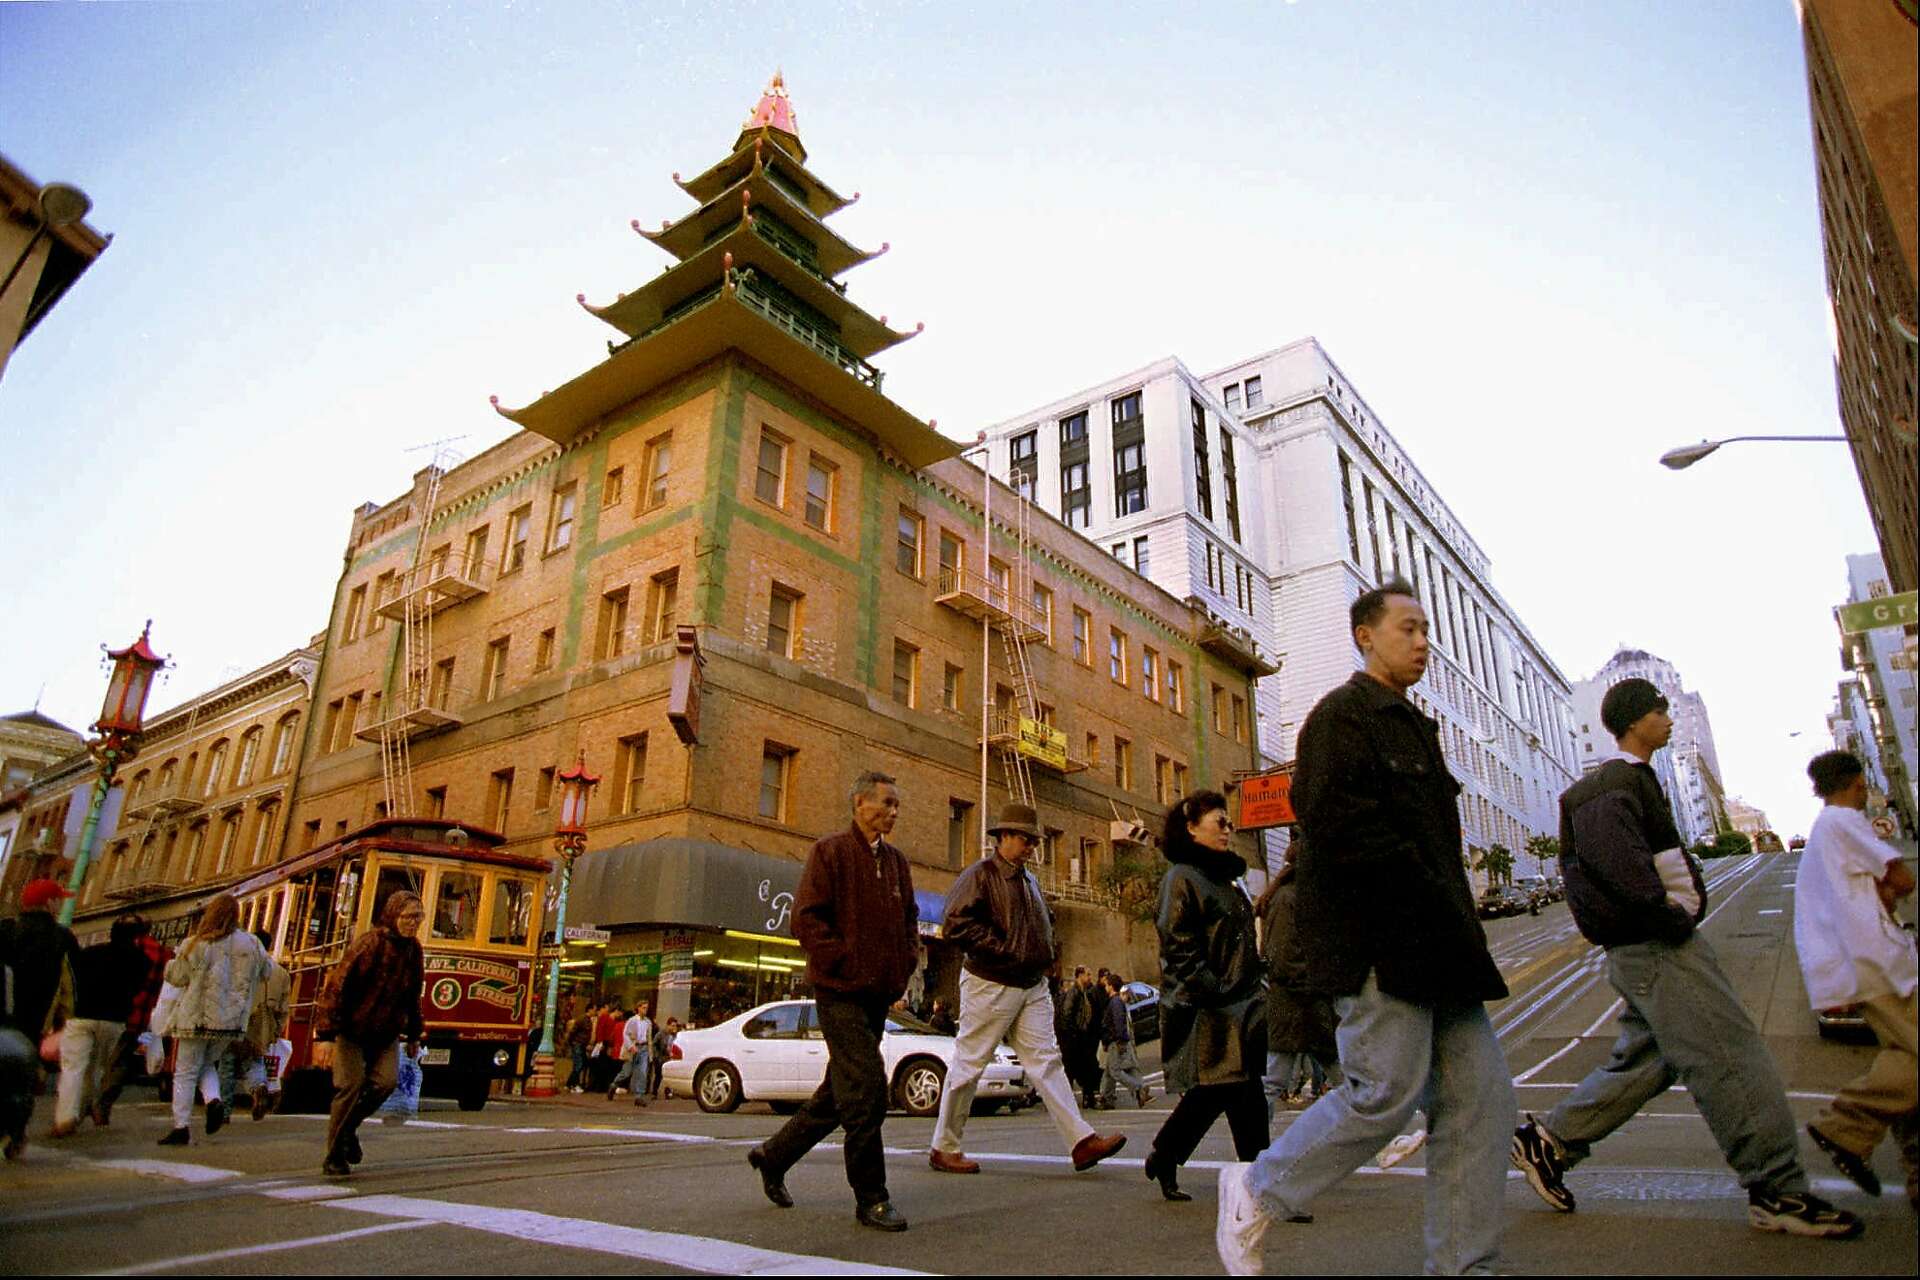 San Francisco's Chinatown was a seedy ghetto. Then a stage set replaced it